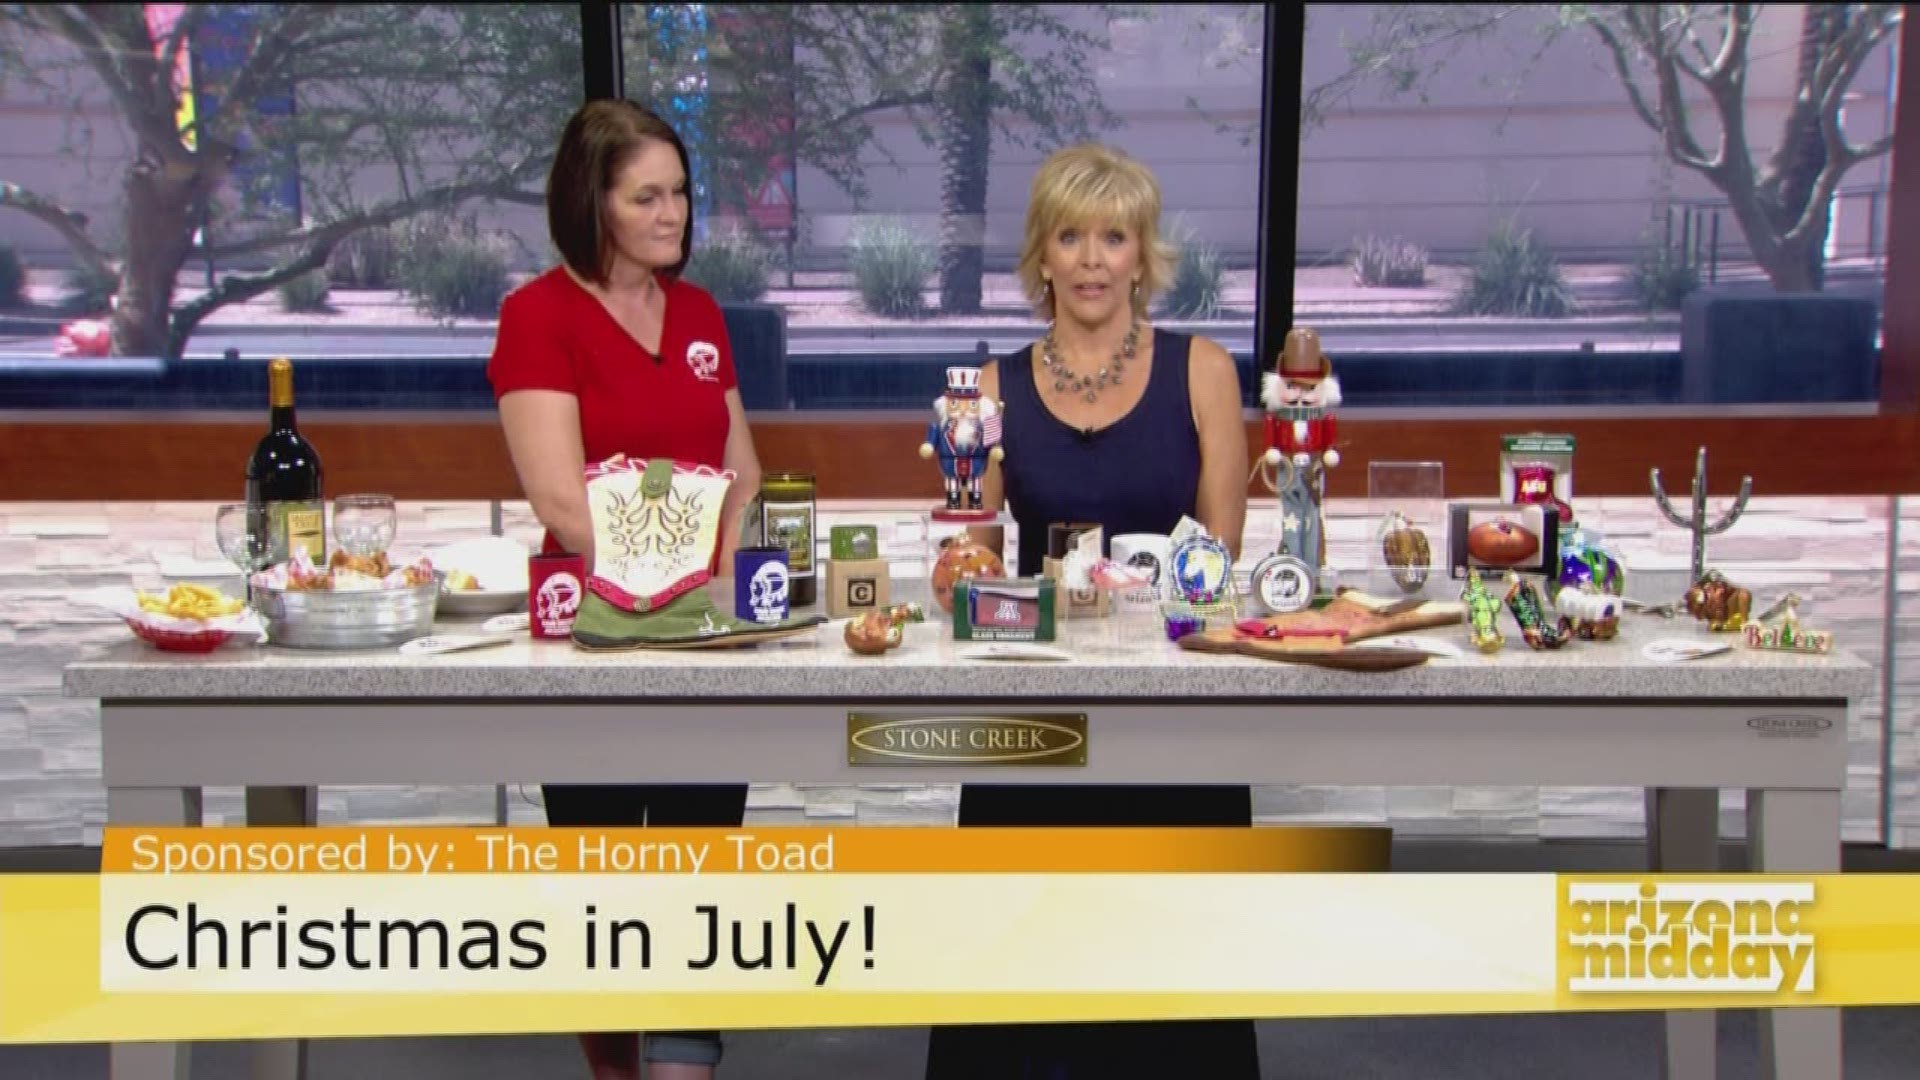 Cave Creek's 'The Horny Toad' stopped by to show us the Christmas in July specials.